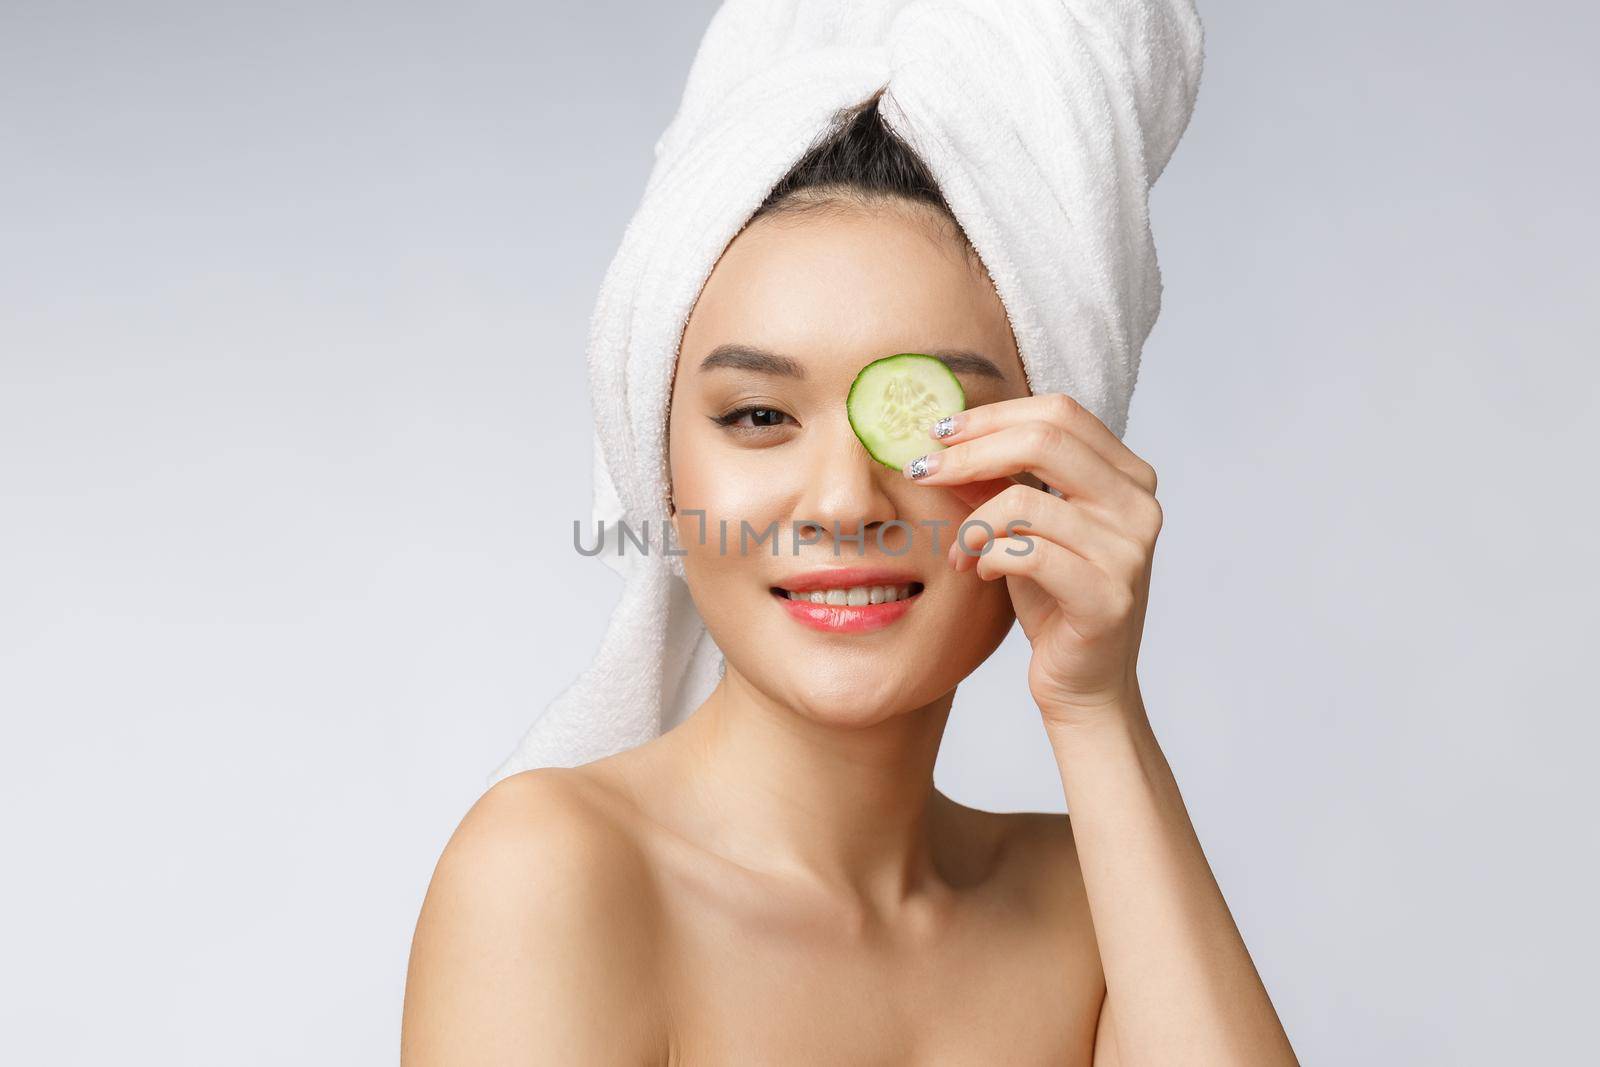 Beauty young asian women skin care image with cucumber on white background studio